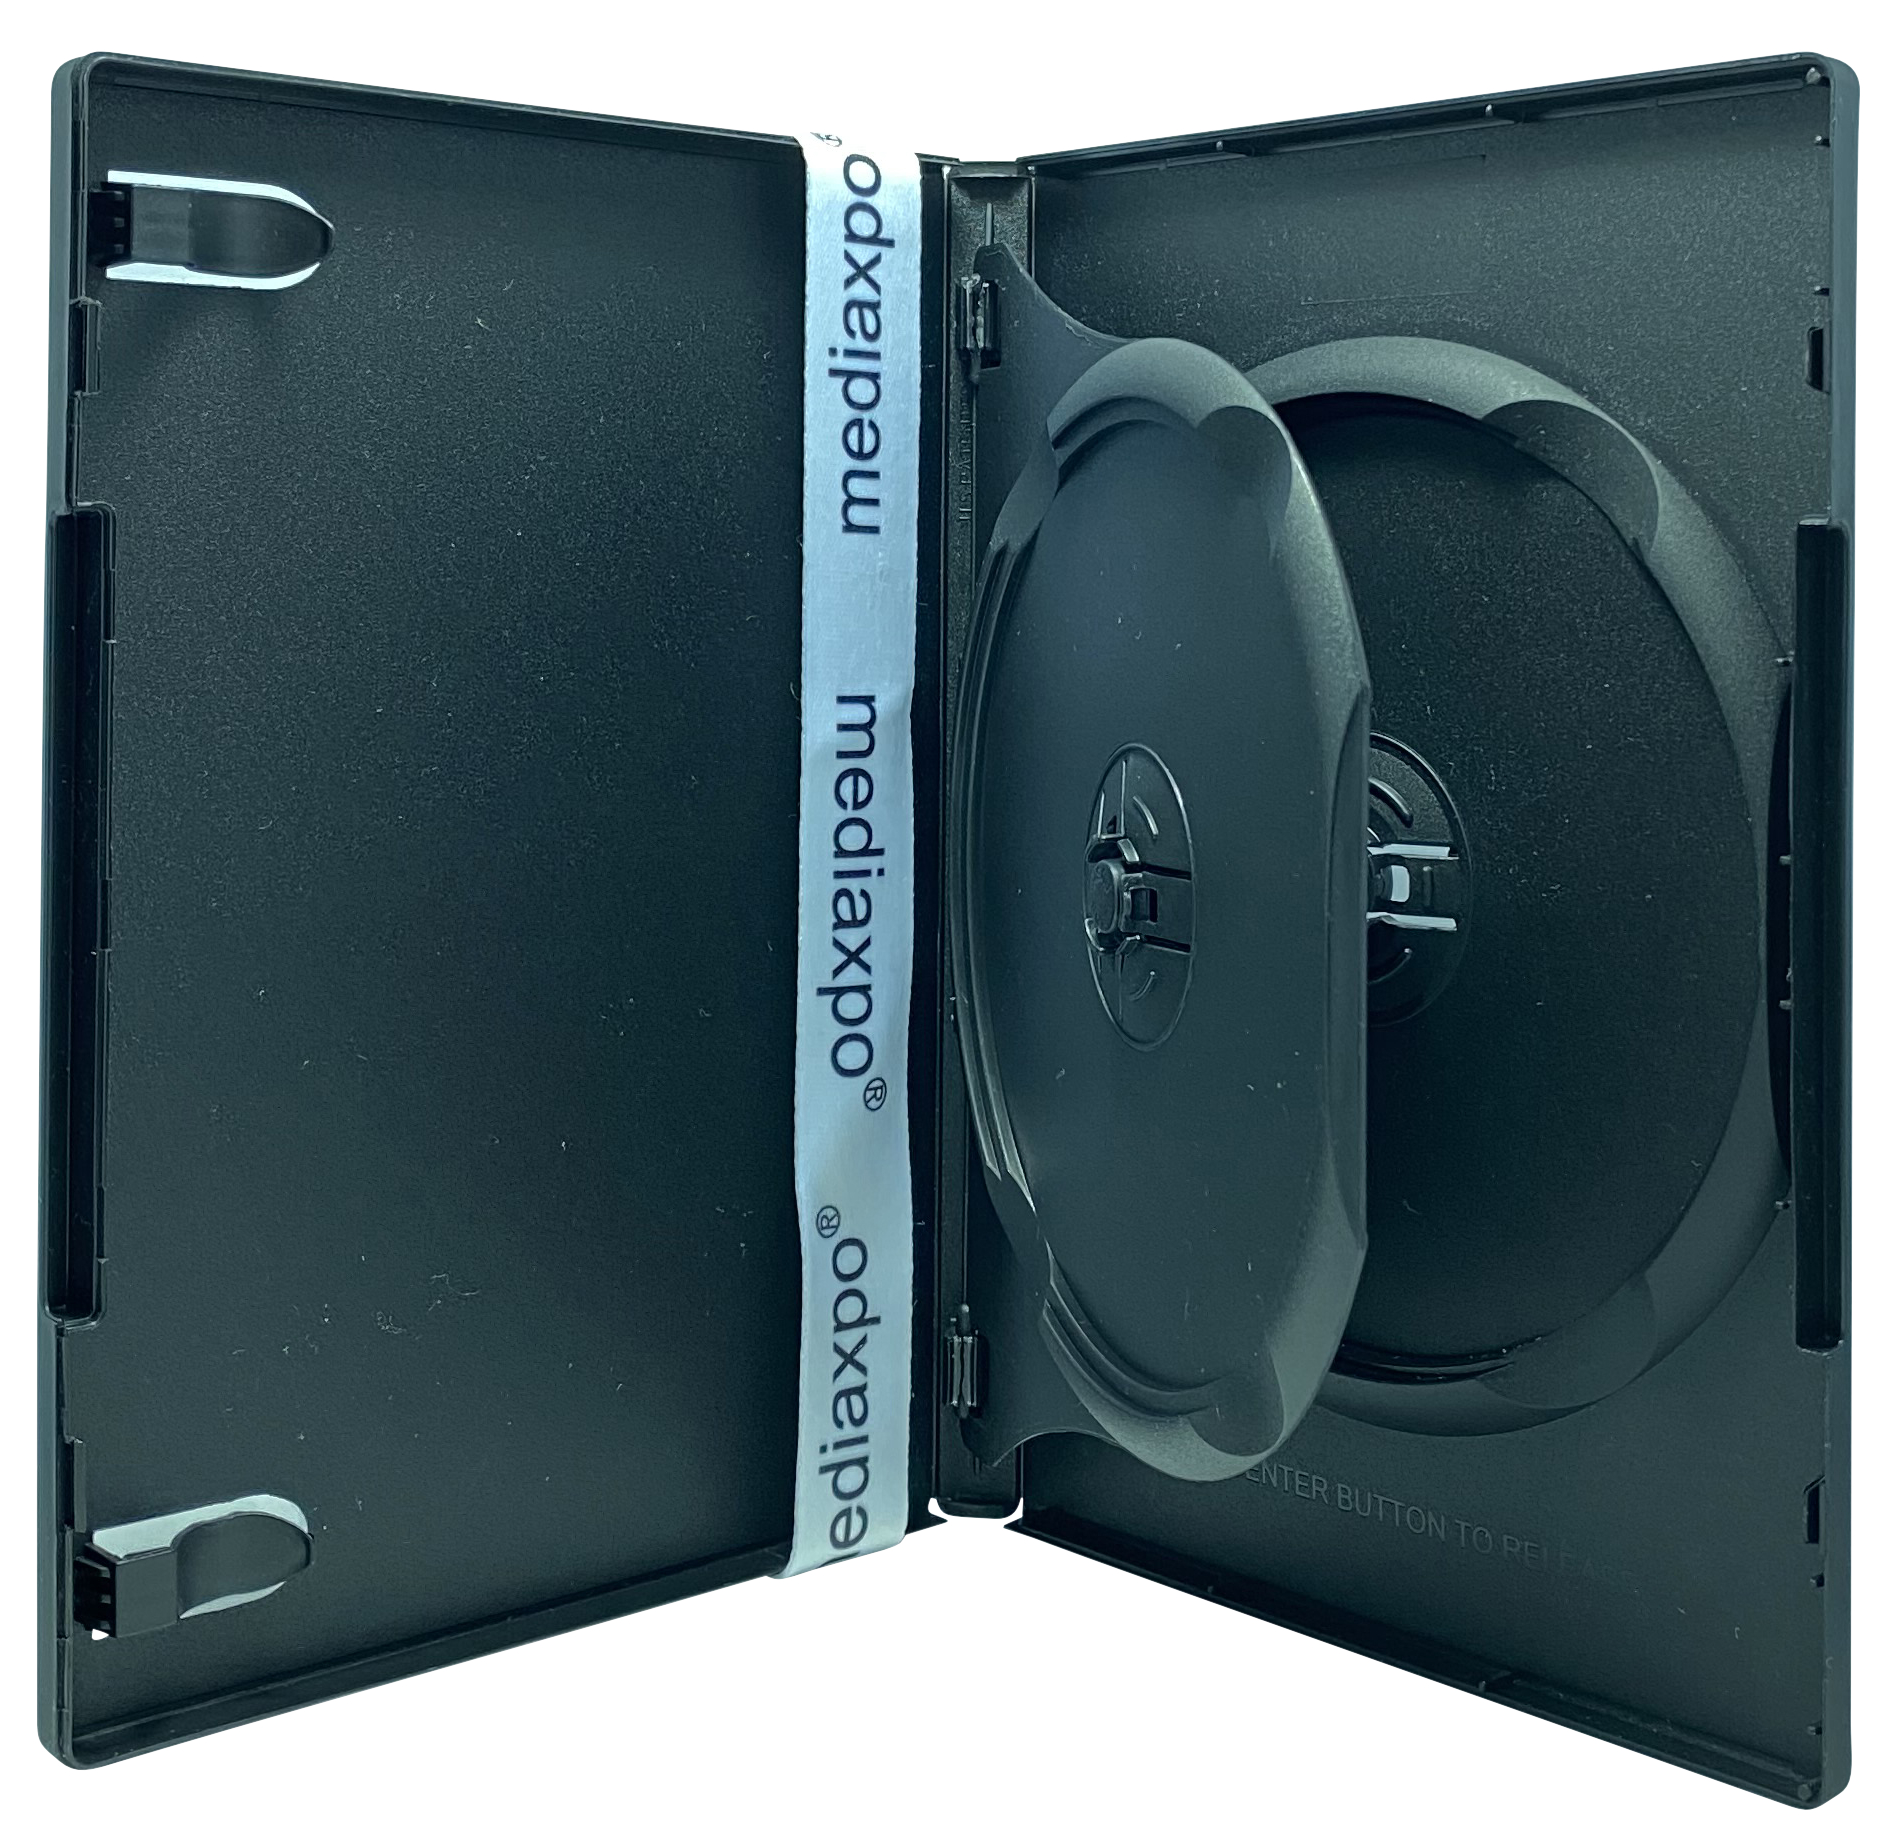 10 STANDARD Black Double DVD Cases with Inner Flap